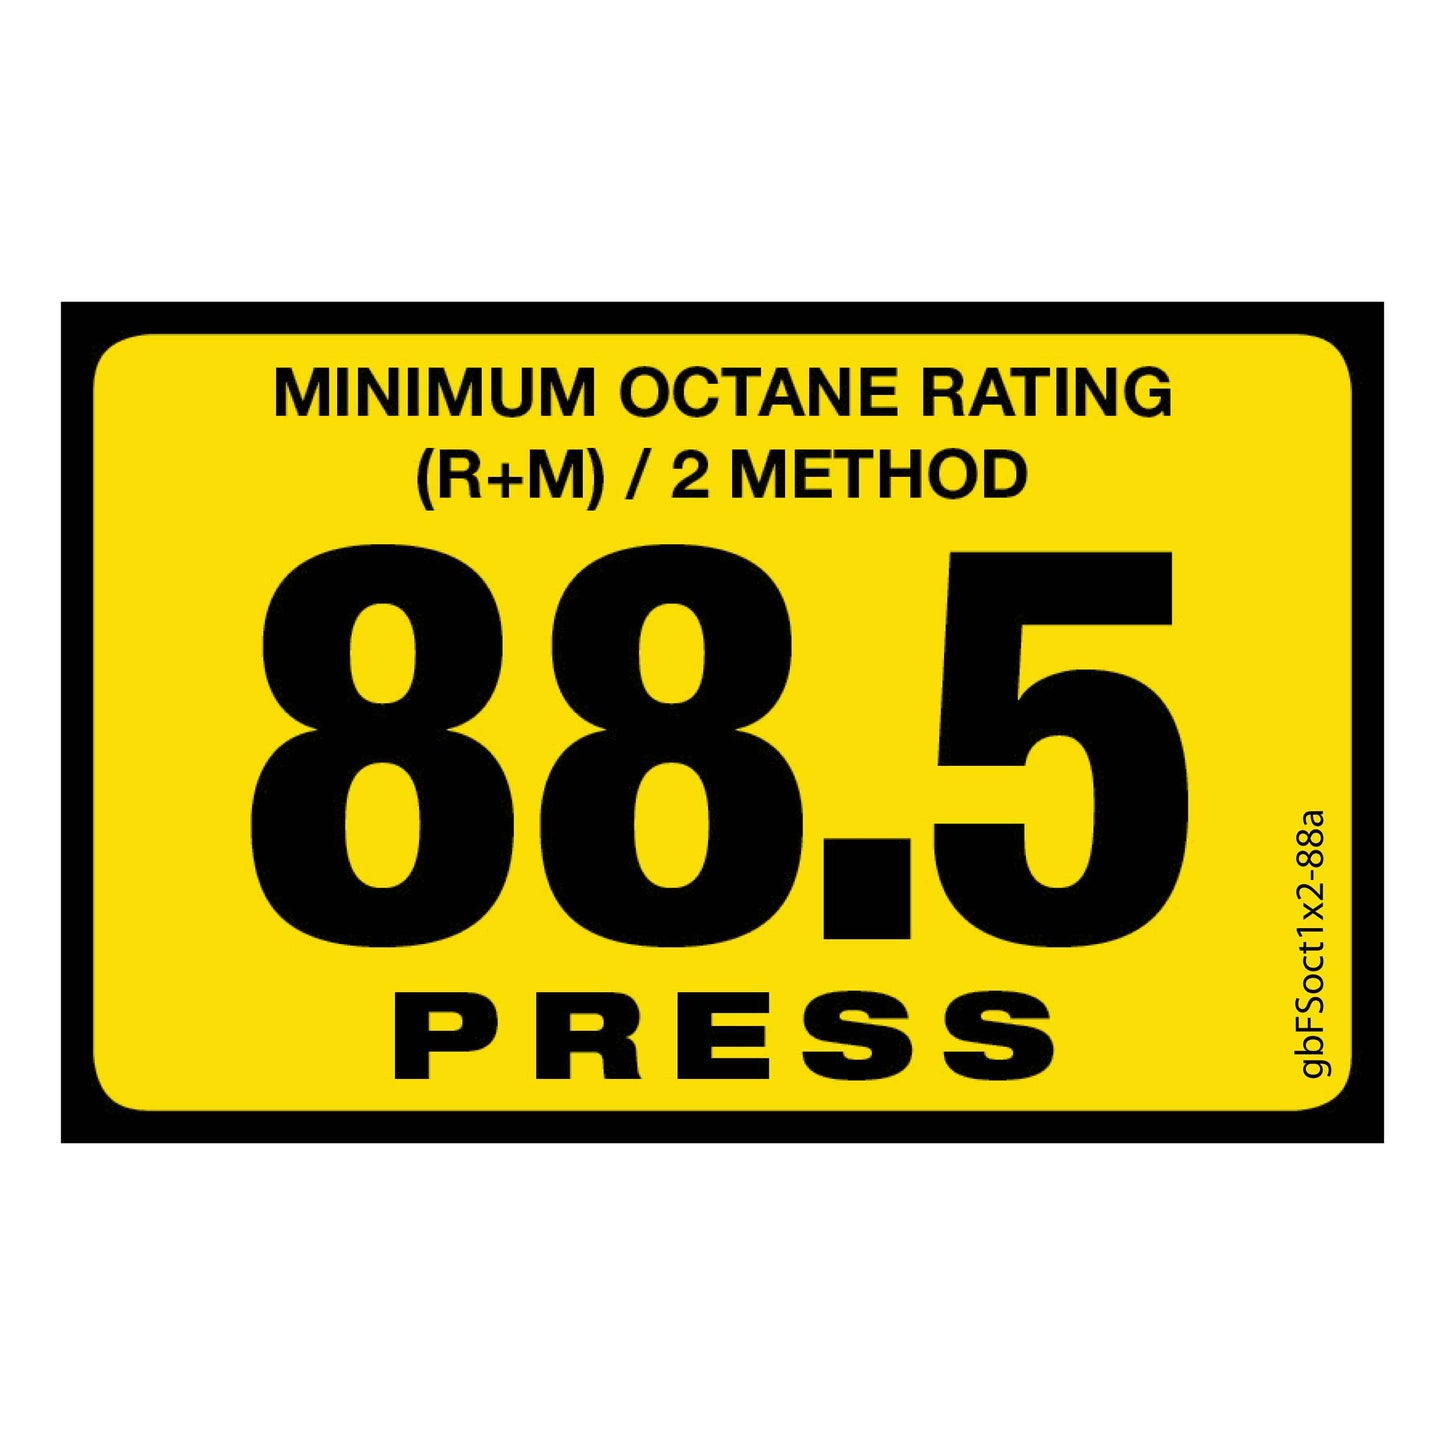 88.5 Press Octane Rating Decal. 1 inch by 2 inches in size. 